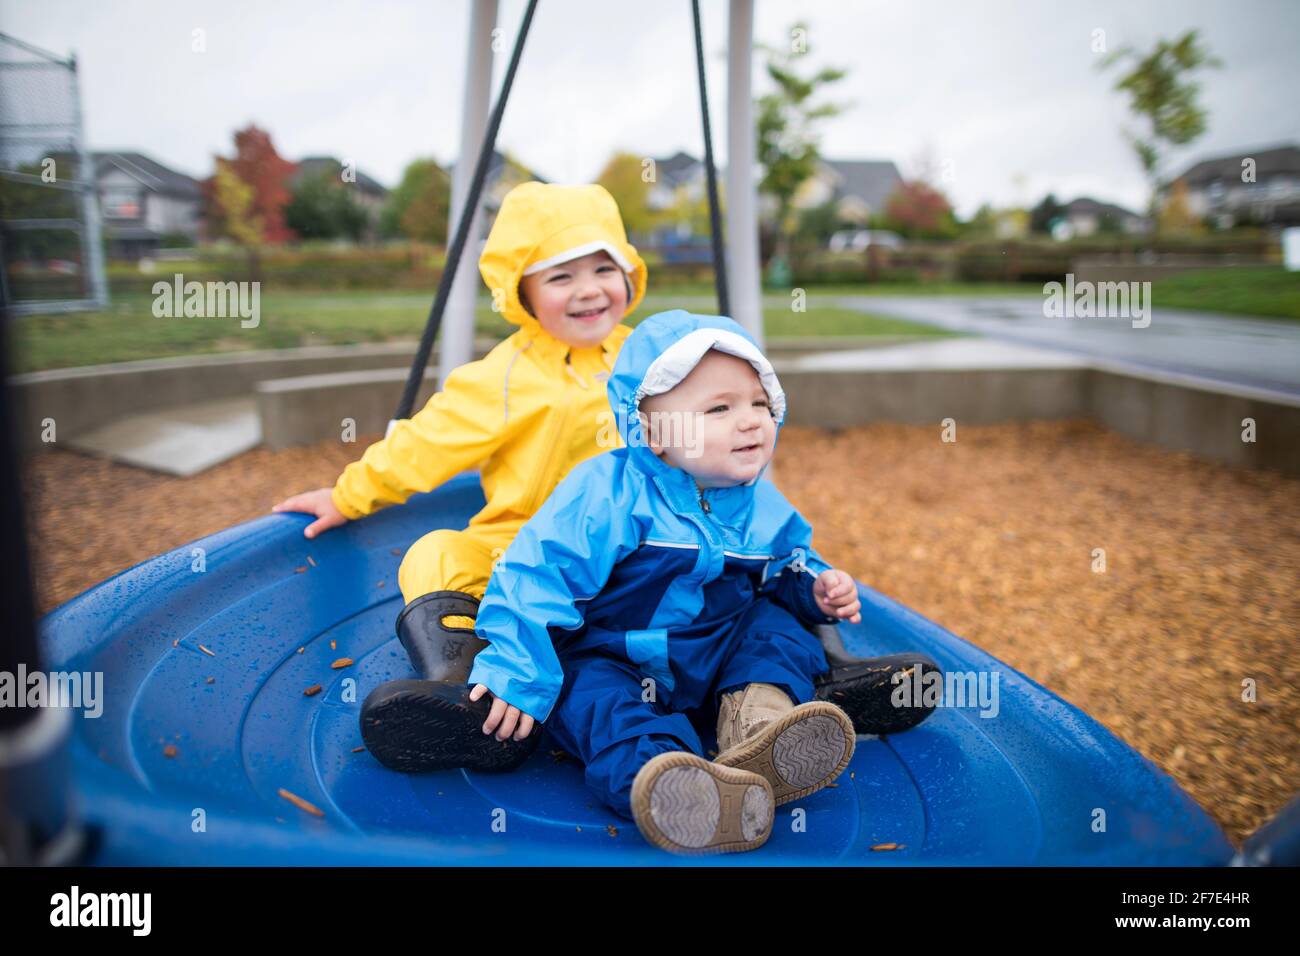 Two kids sit on a large blue swing at the park Stock Photo